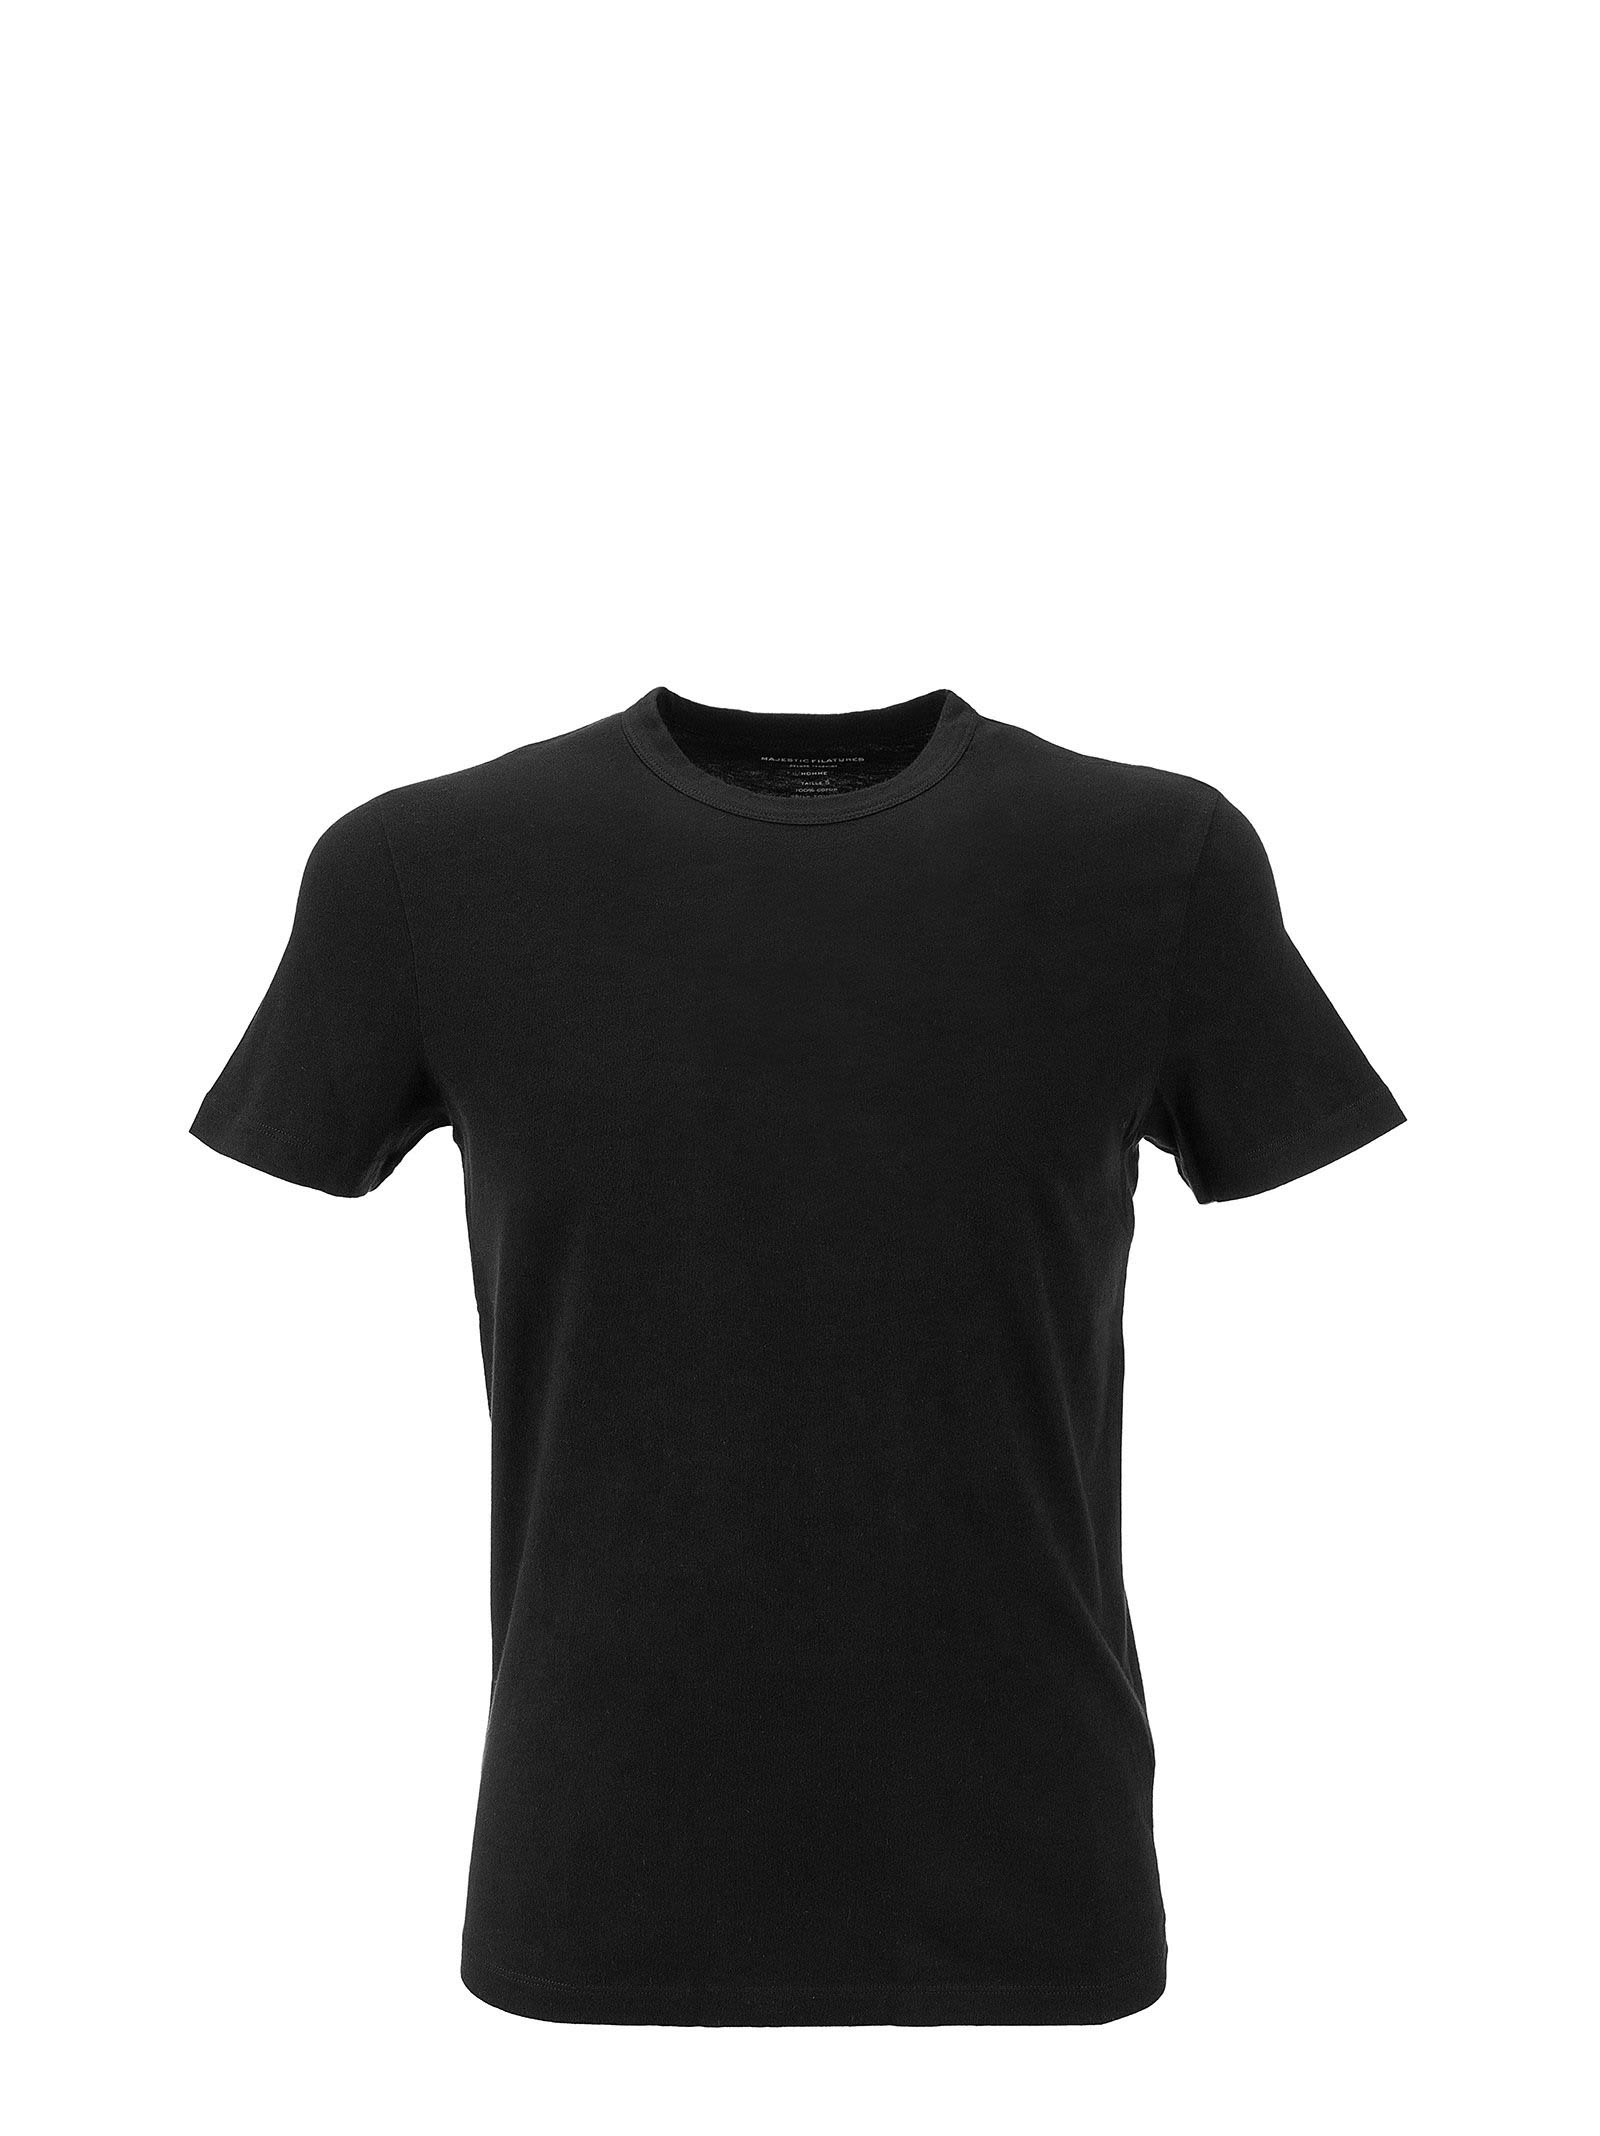 MAJESTIC BLACK CREW NECK T-SHIRT IN SILK TOUCH COTTON,M537 HTS084 002